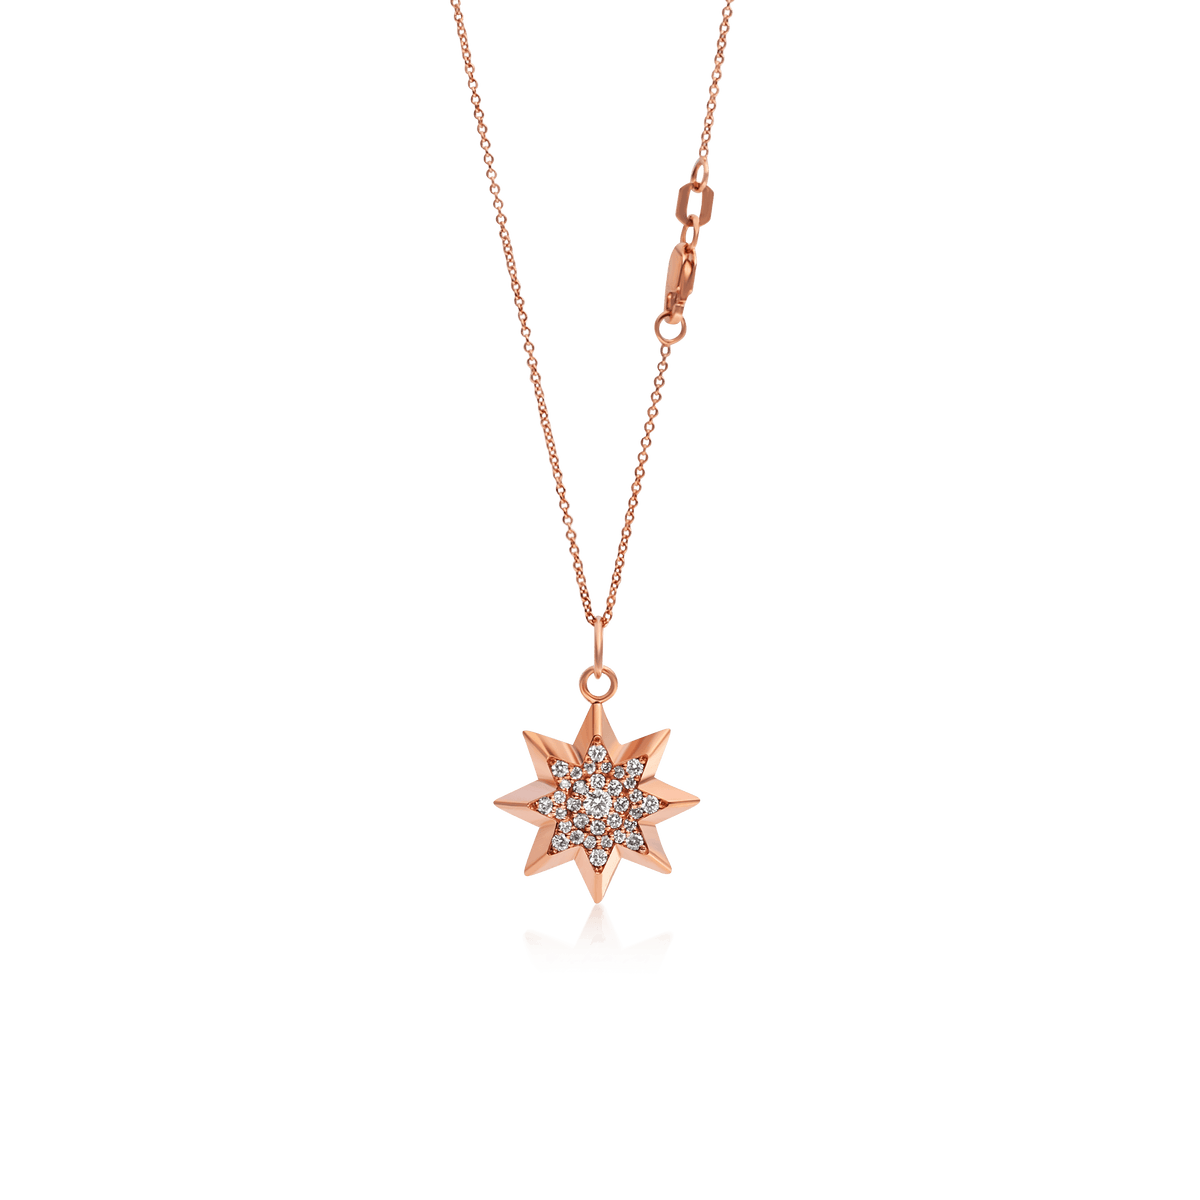 Star Necklace-18 Karat Solid Gold With Diamonds For Women